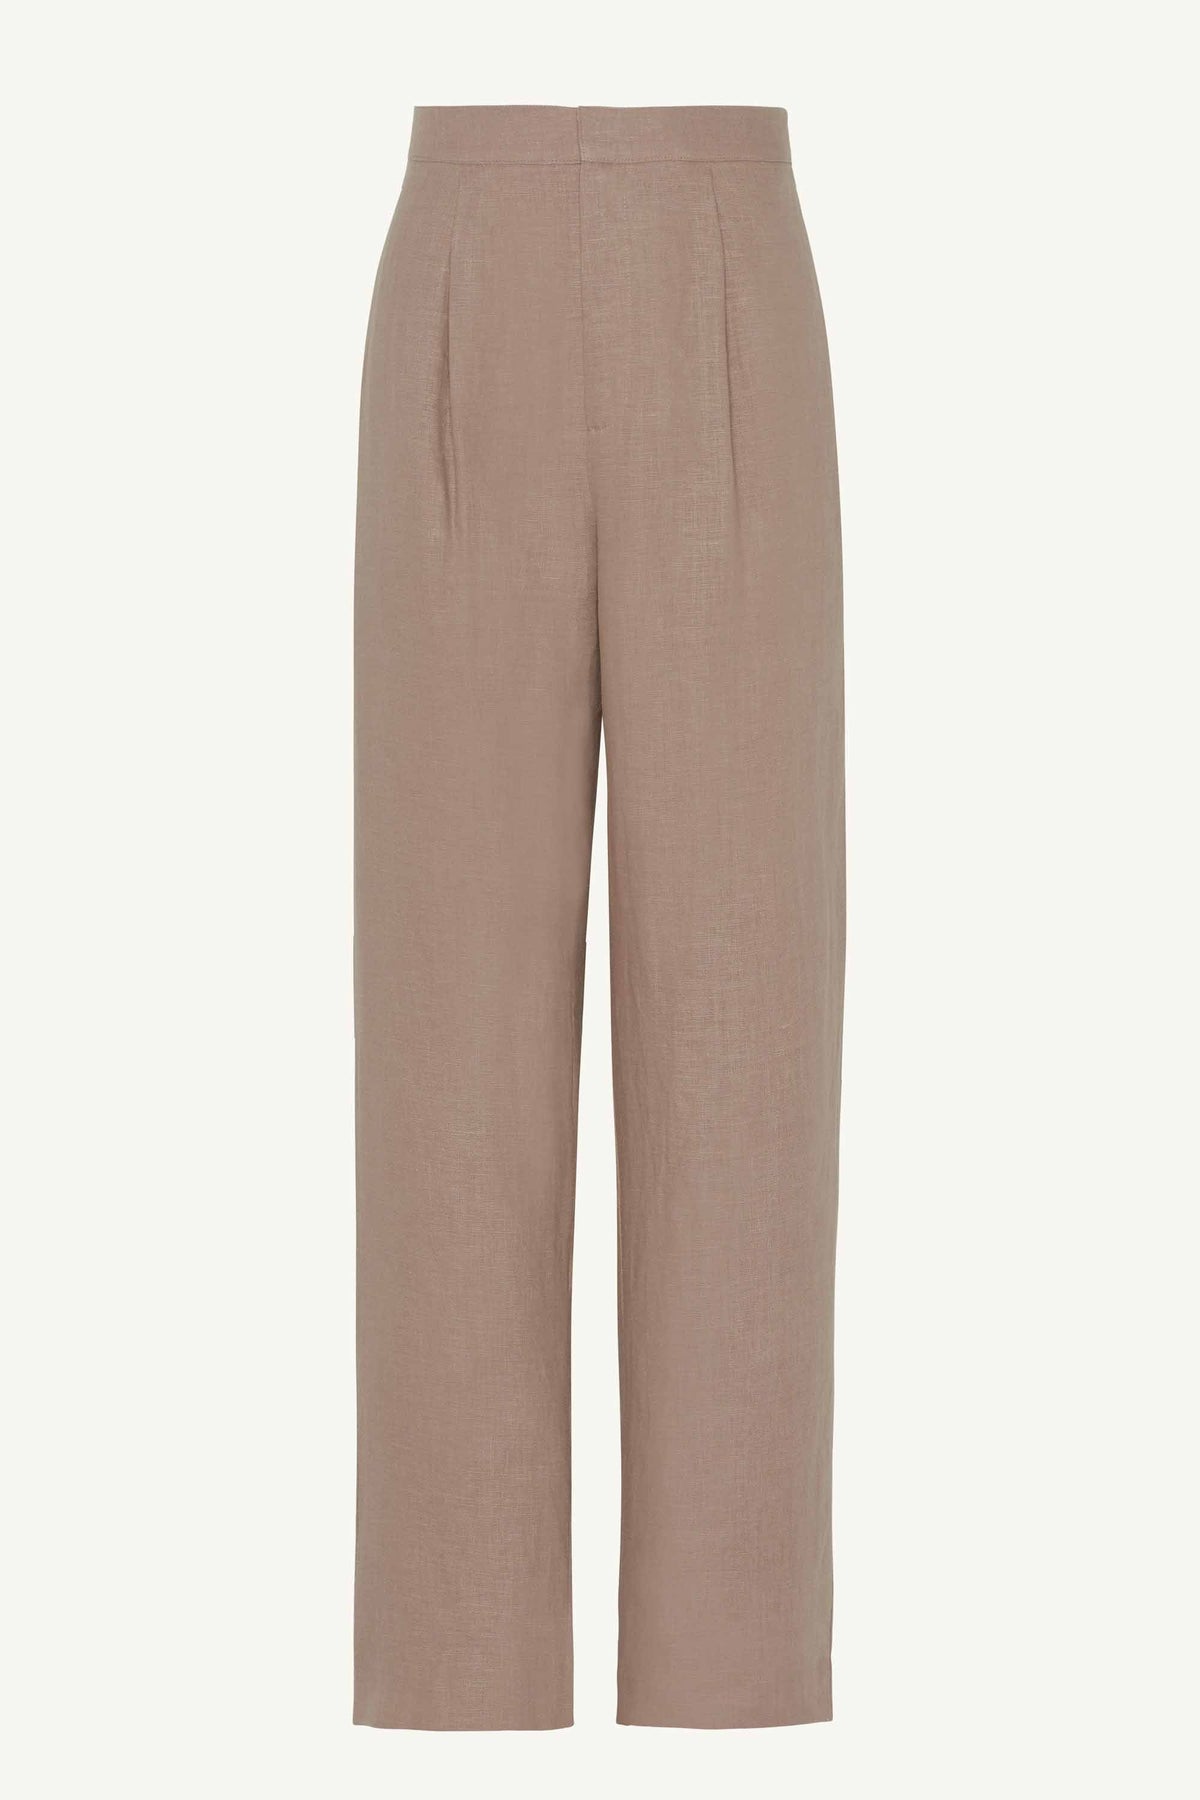 Linen Straight Leg Pants - Caffe Clothing Veiled Collection 